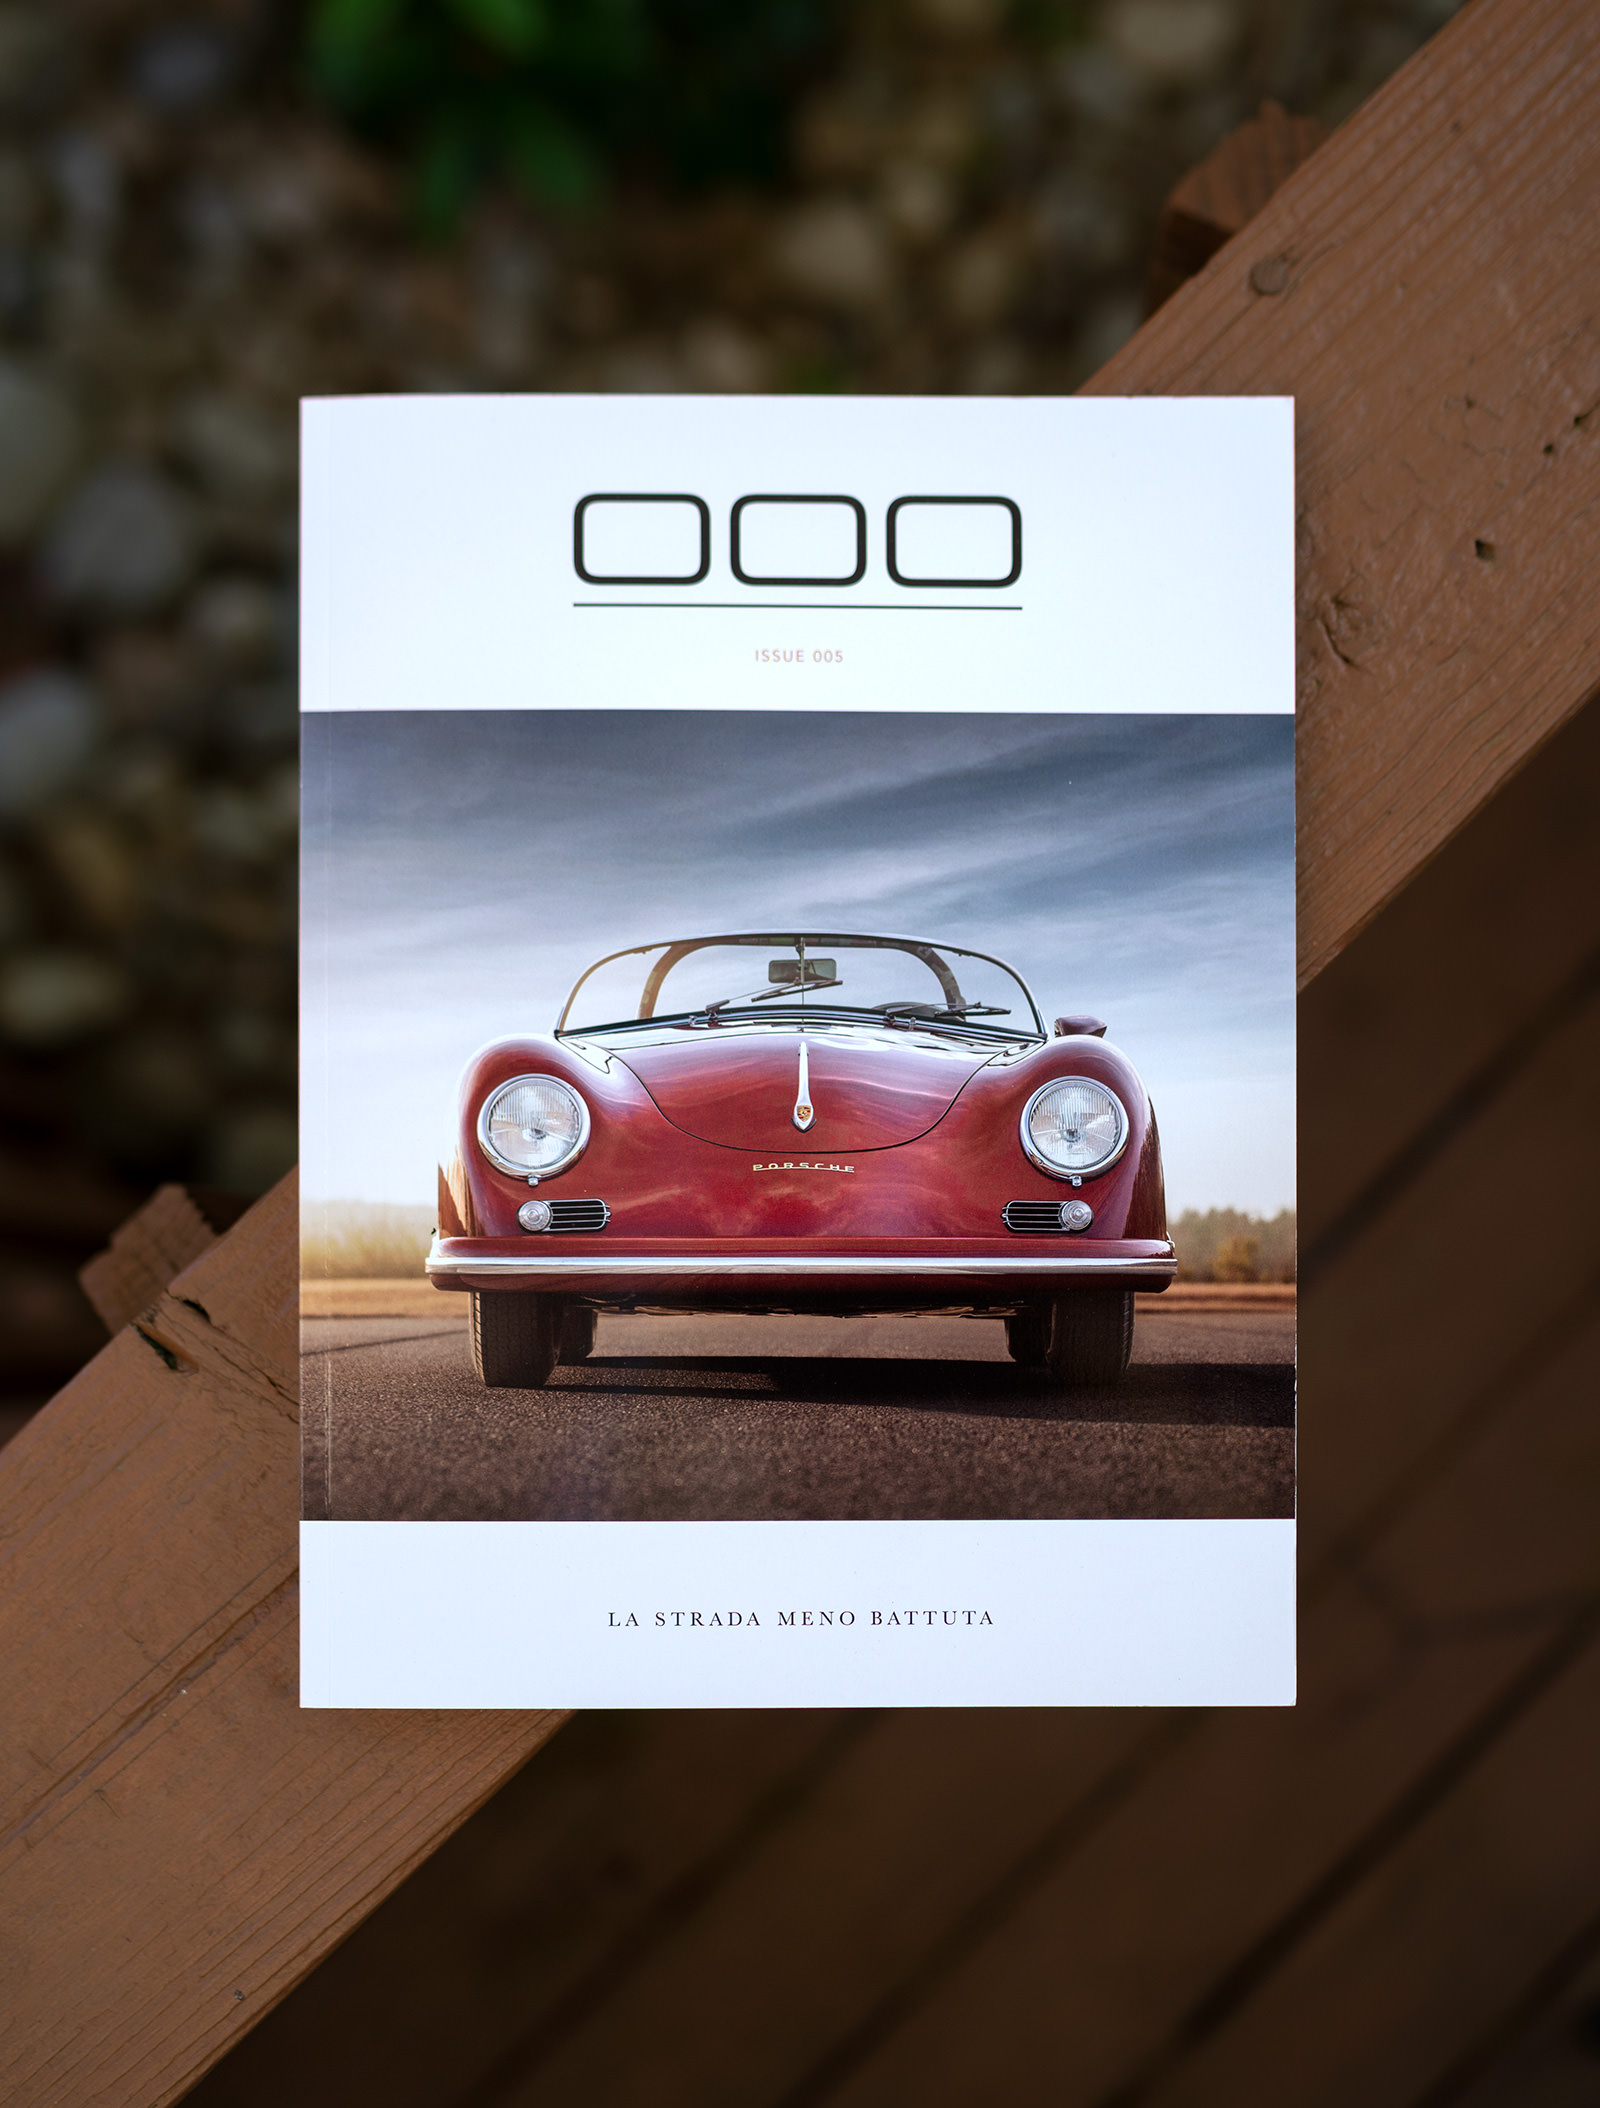 000 Magazine: A Pair of 356 Rubies